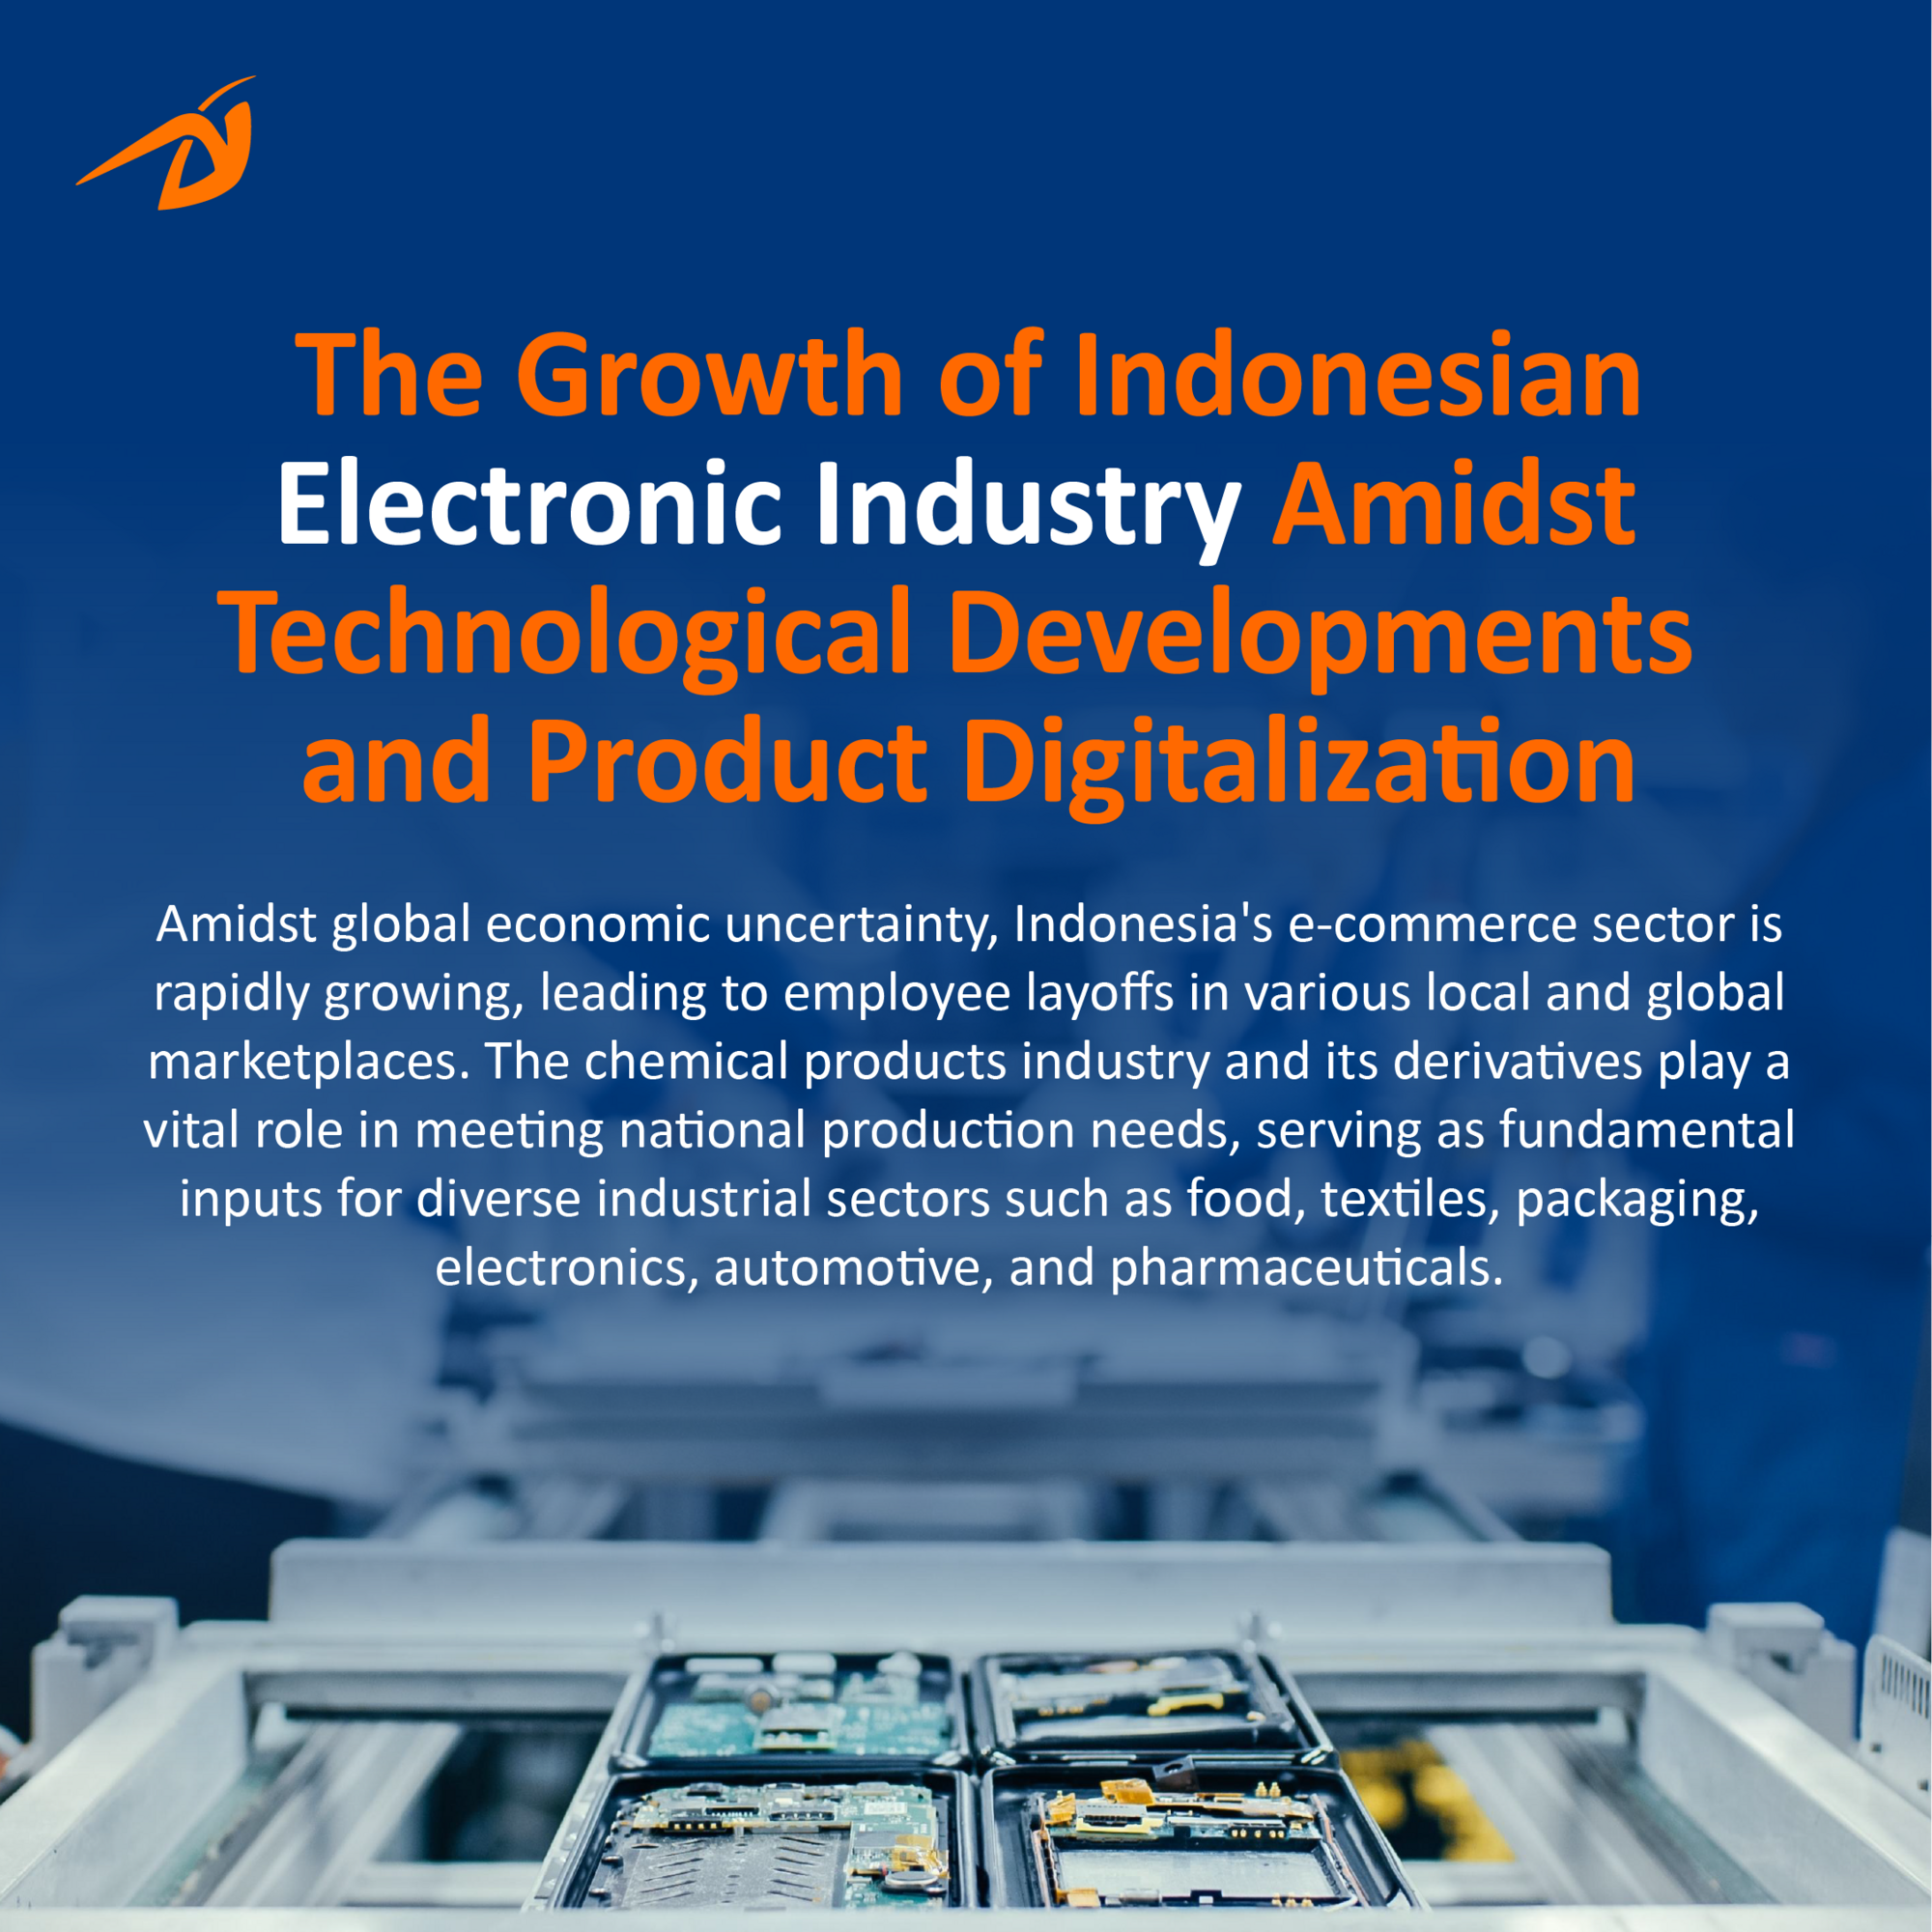 The Growth of Indonesian Electronic Industry Amidst Technological Developments and Product Digitalization